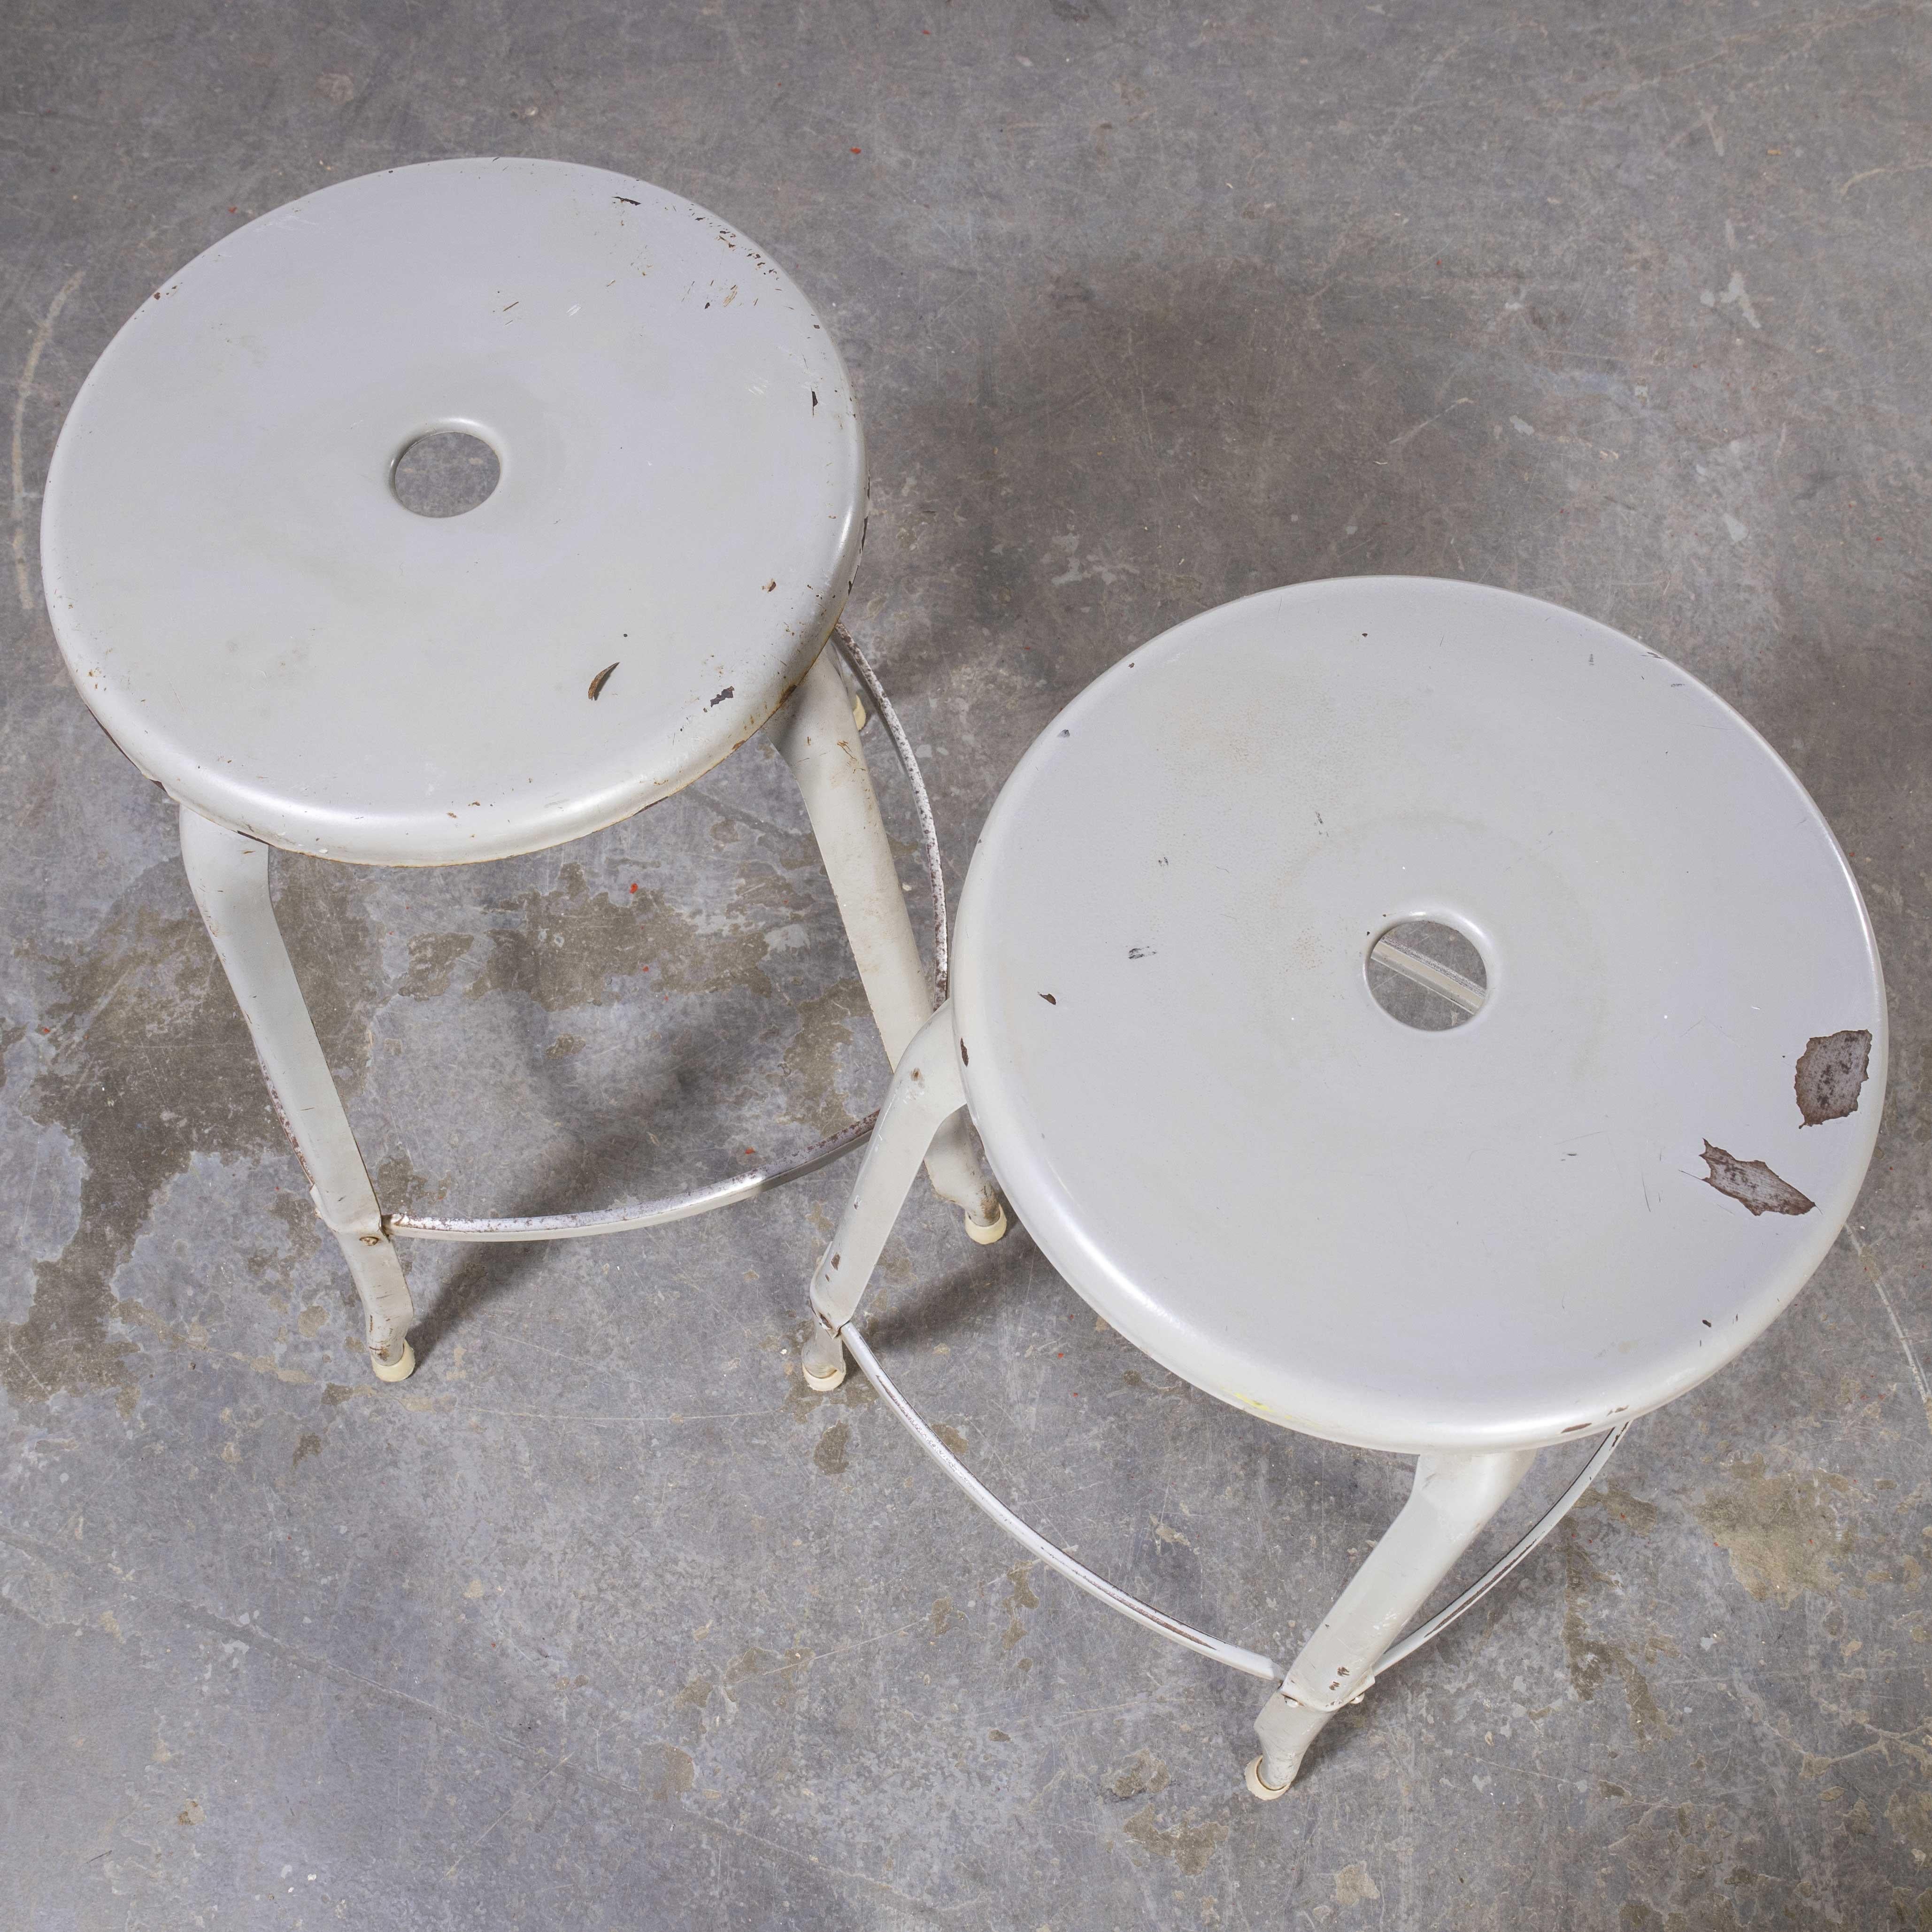 1950’s Original industrial Nicolle stacking stools, pair.

1950’s Original industrial Nicolle stacking stools, pair. One of our all time favourite products, exceptional in design with the minimal use of materials yet strong, well proportioned and